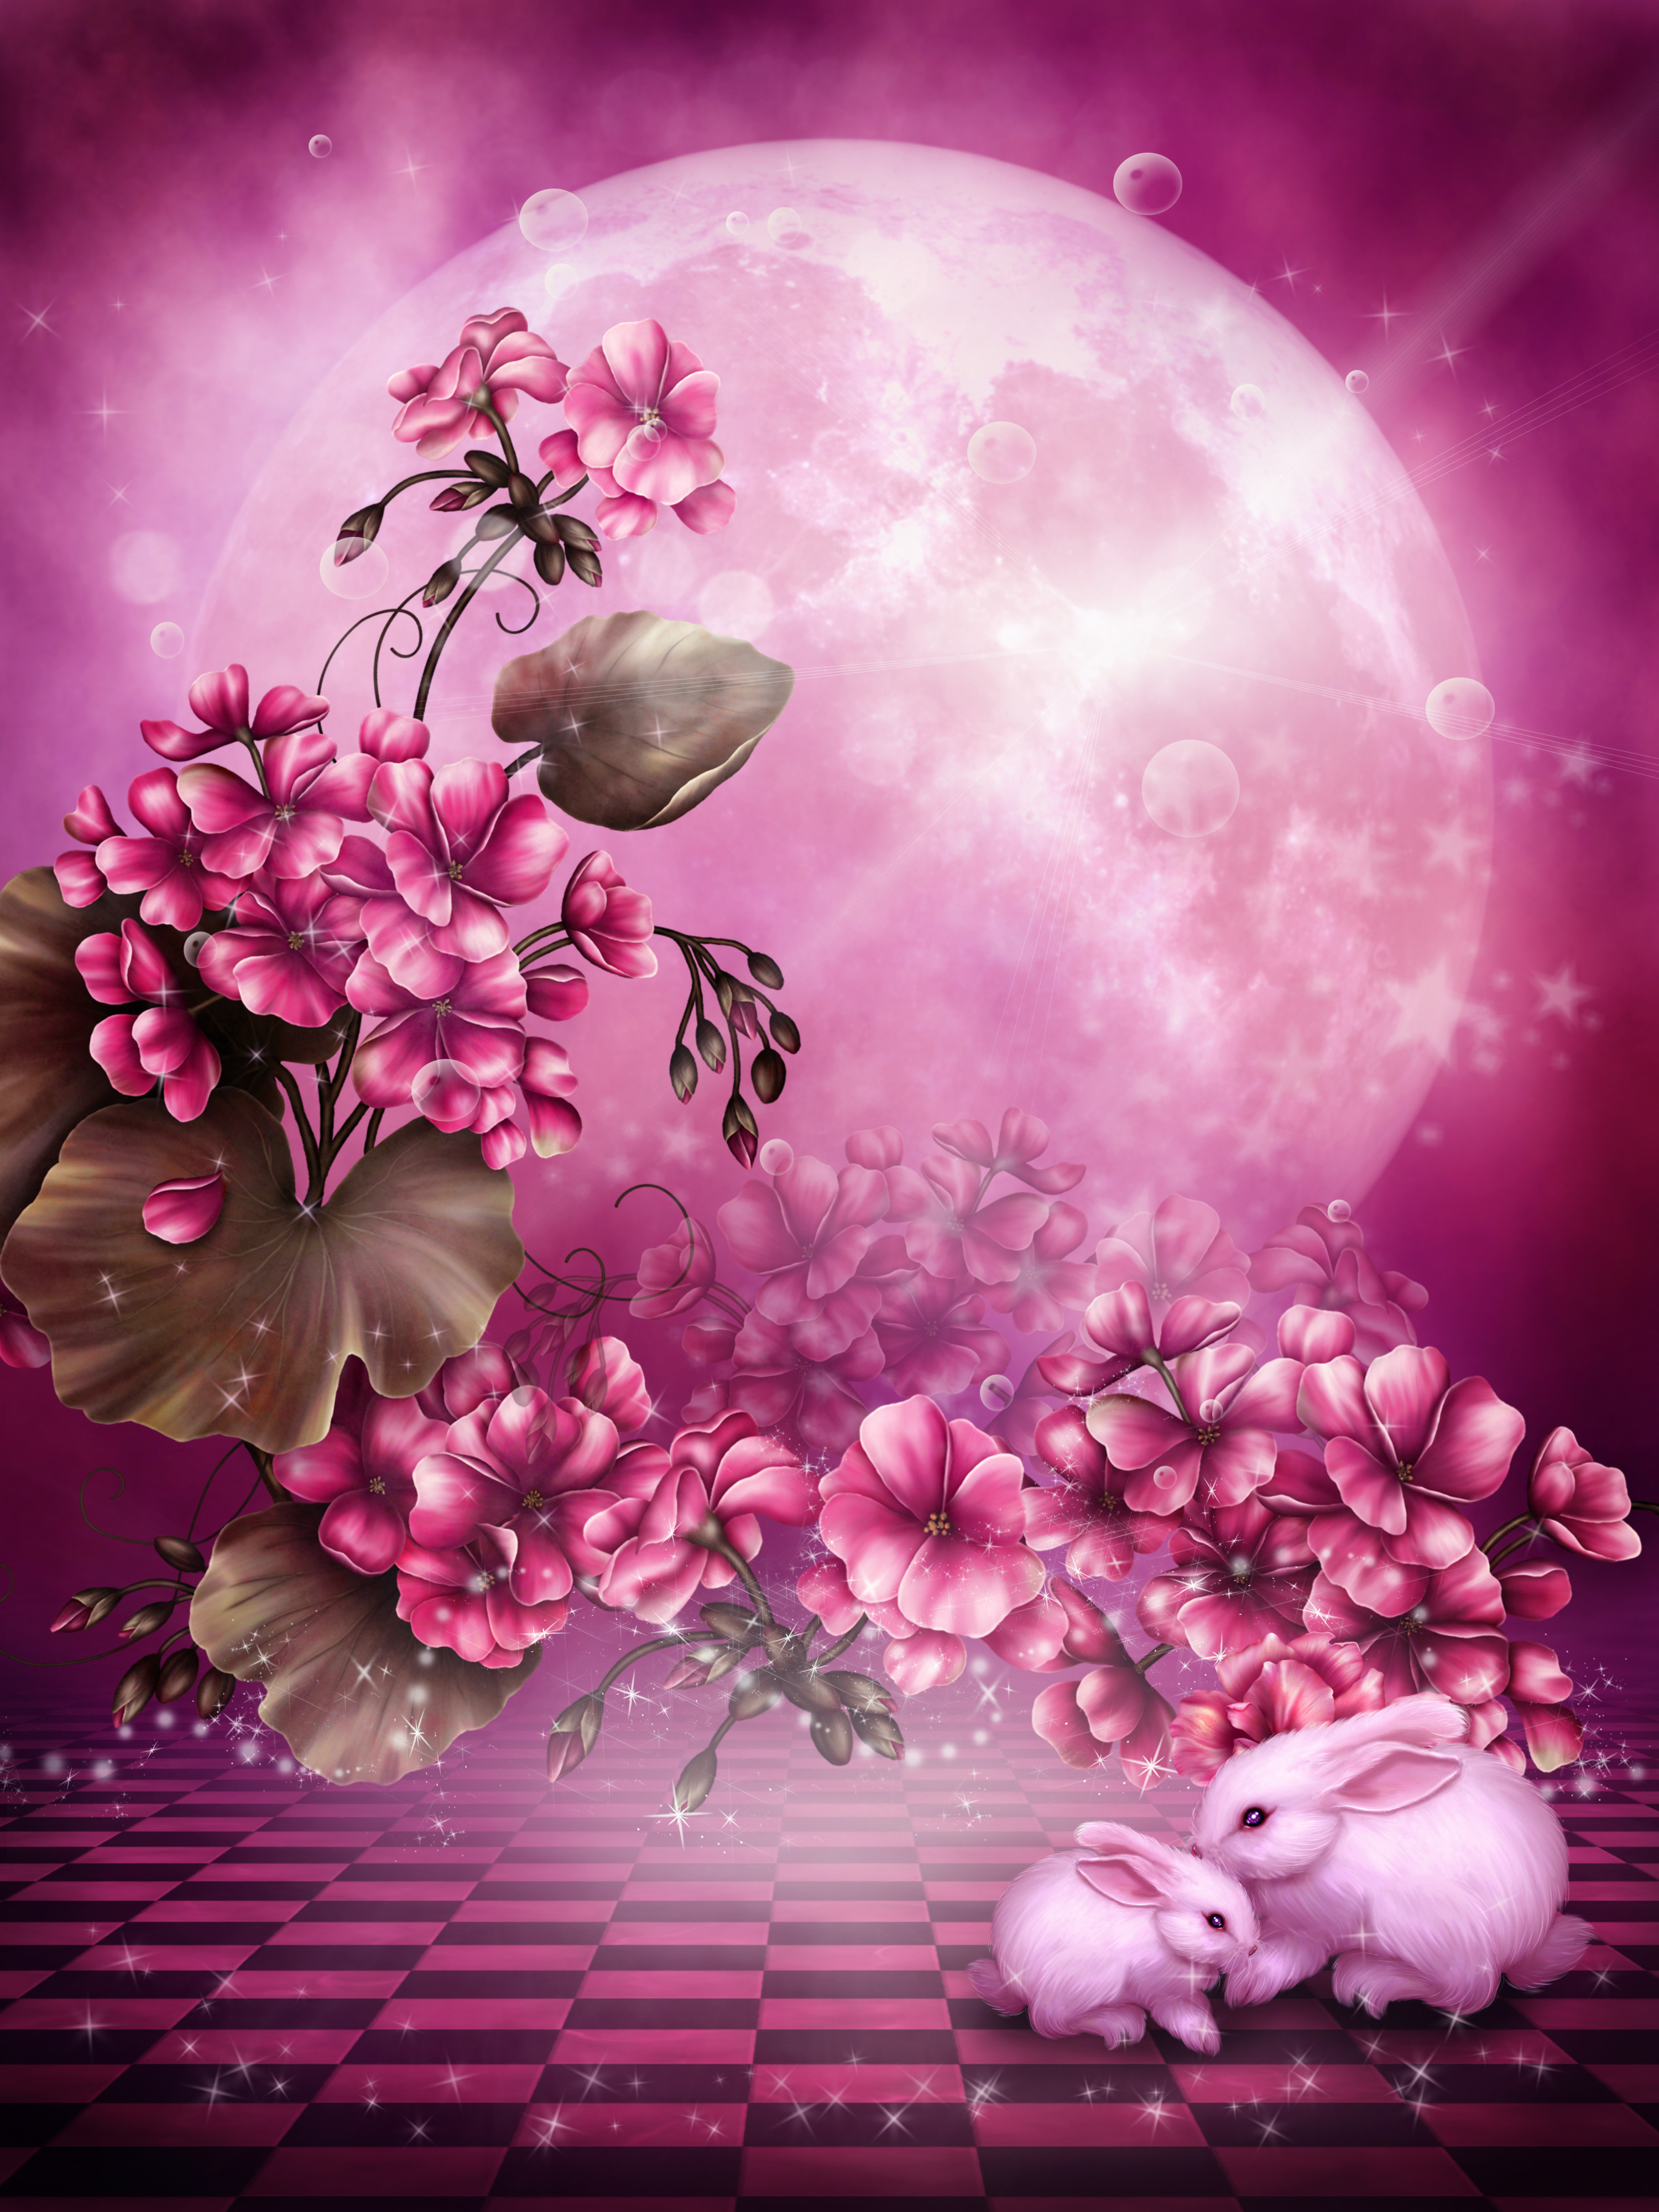 rabbits, pictures, plants, flowers, red wallpaper for mobile